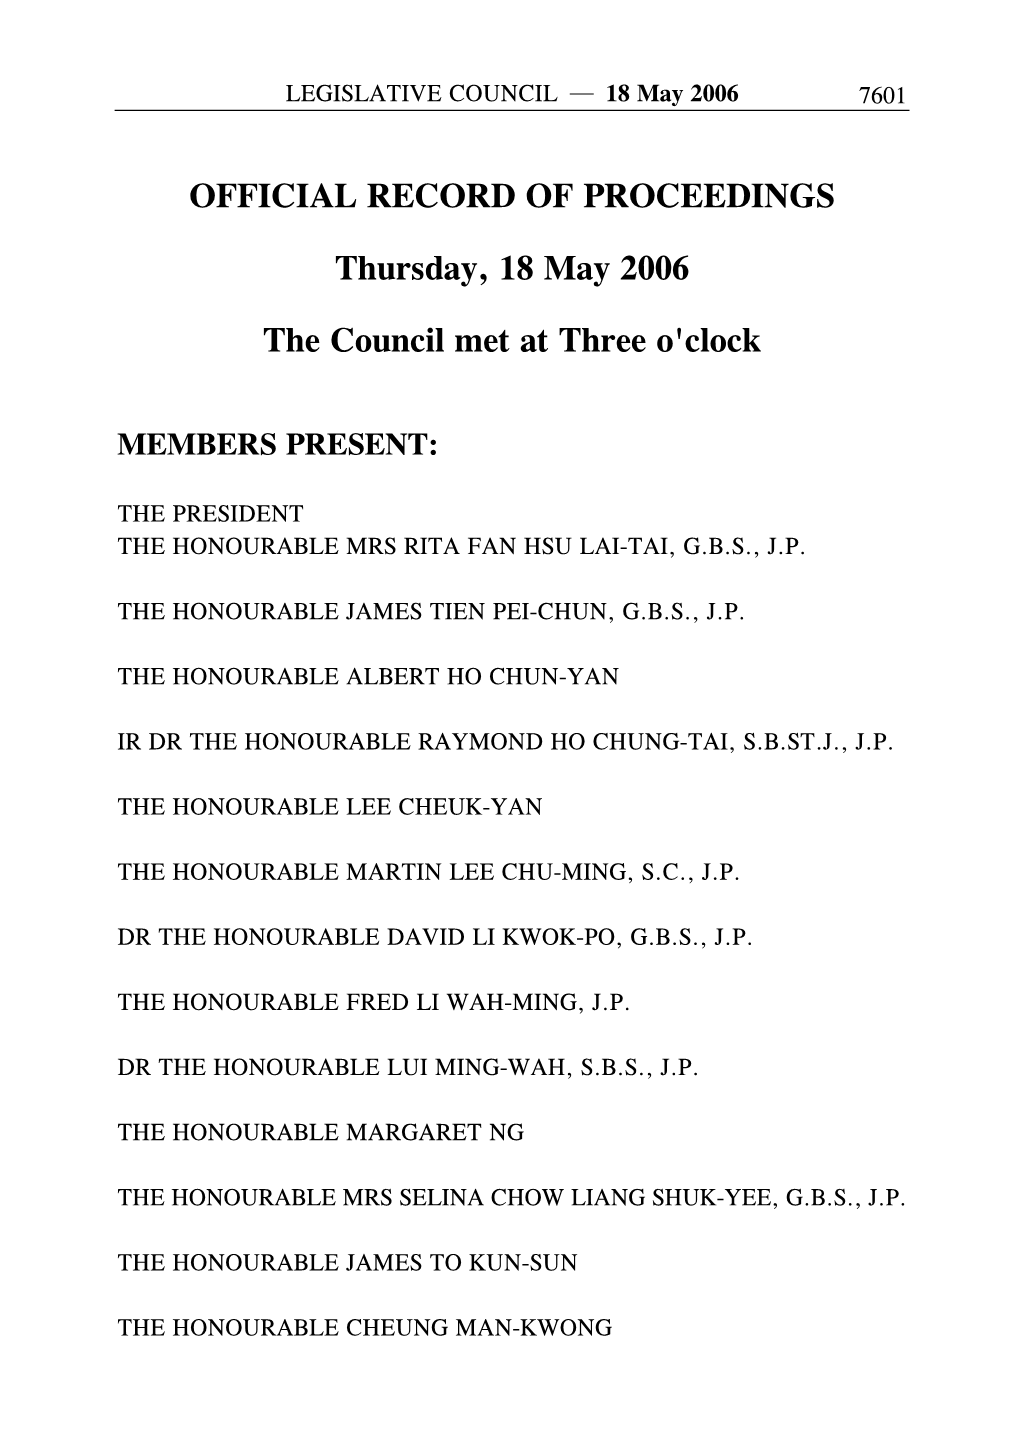 OFFICIAL RECORD of PROCEEDINGS Thursday, 18 May